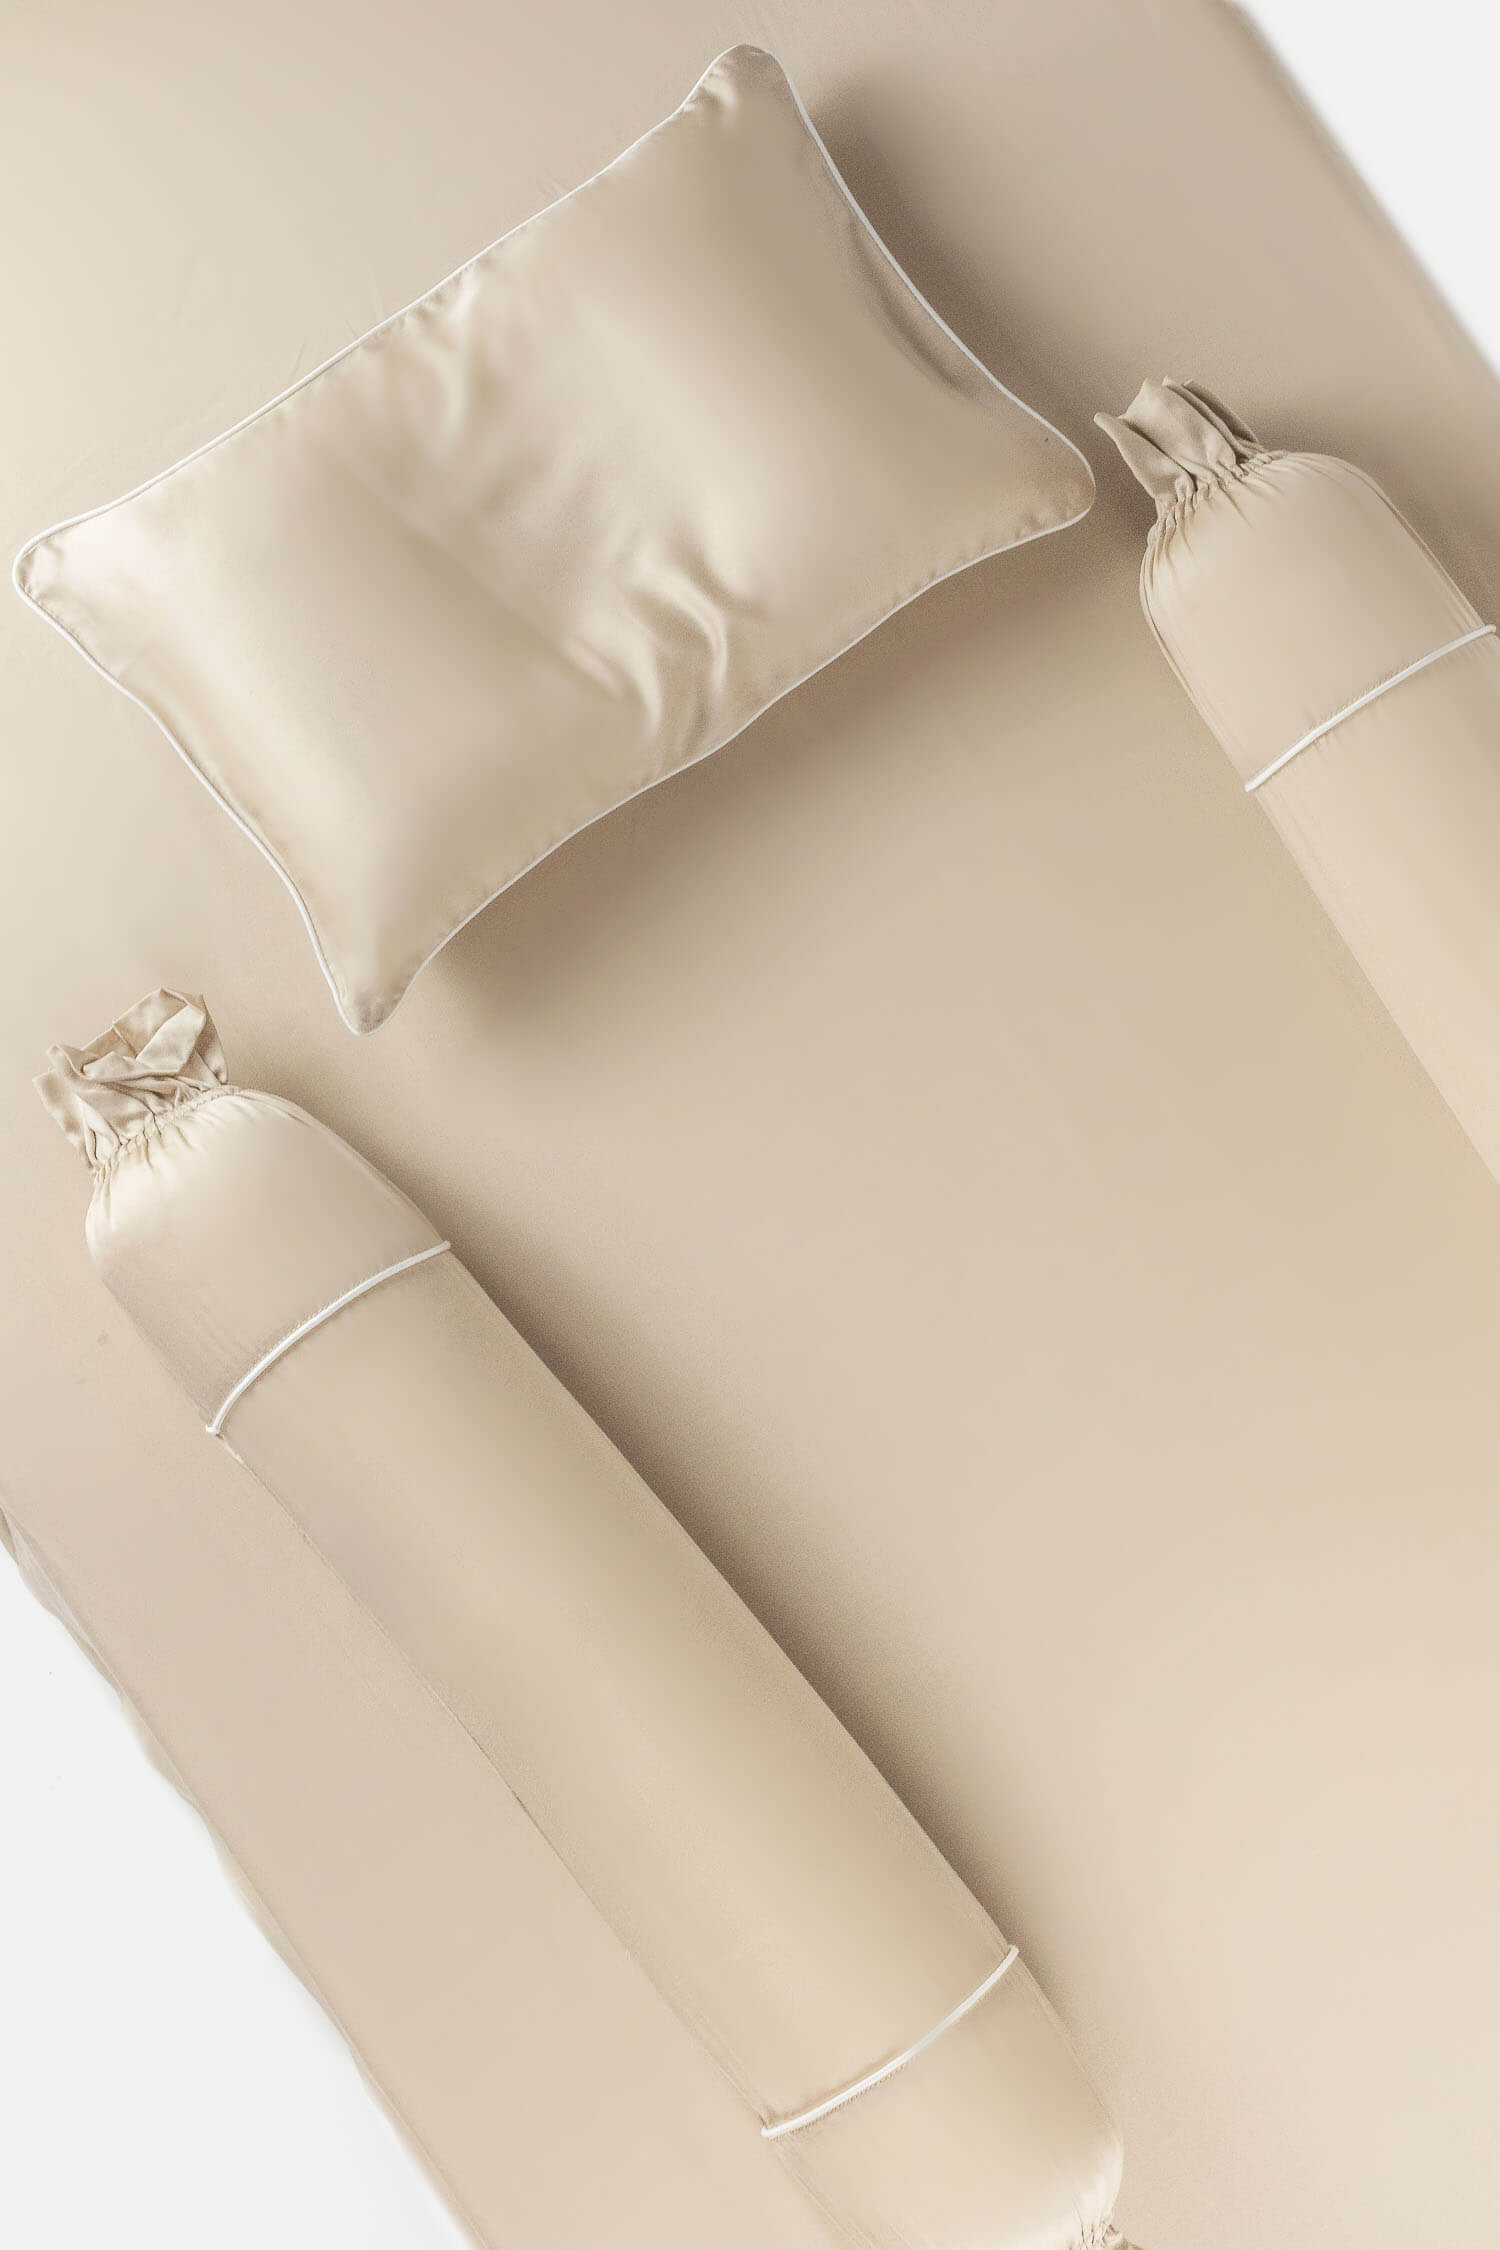 ava and ava ph organic bamboo lyocell baby fitted crib sheet and baby pillowcases in sandshell beige with white piping